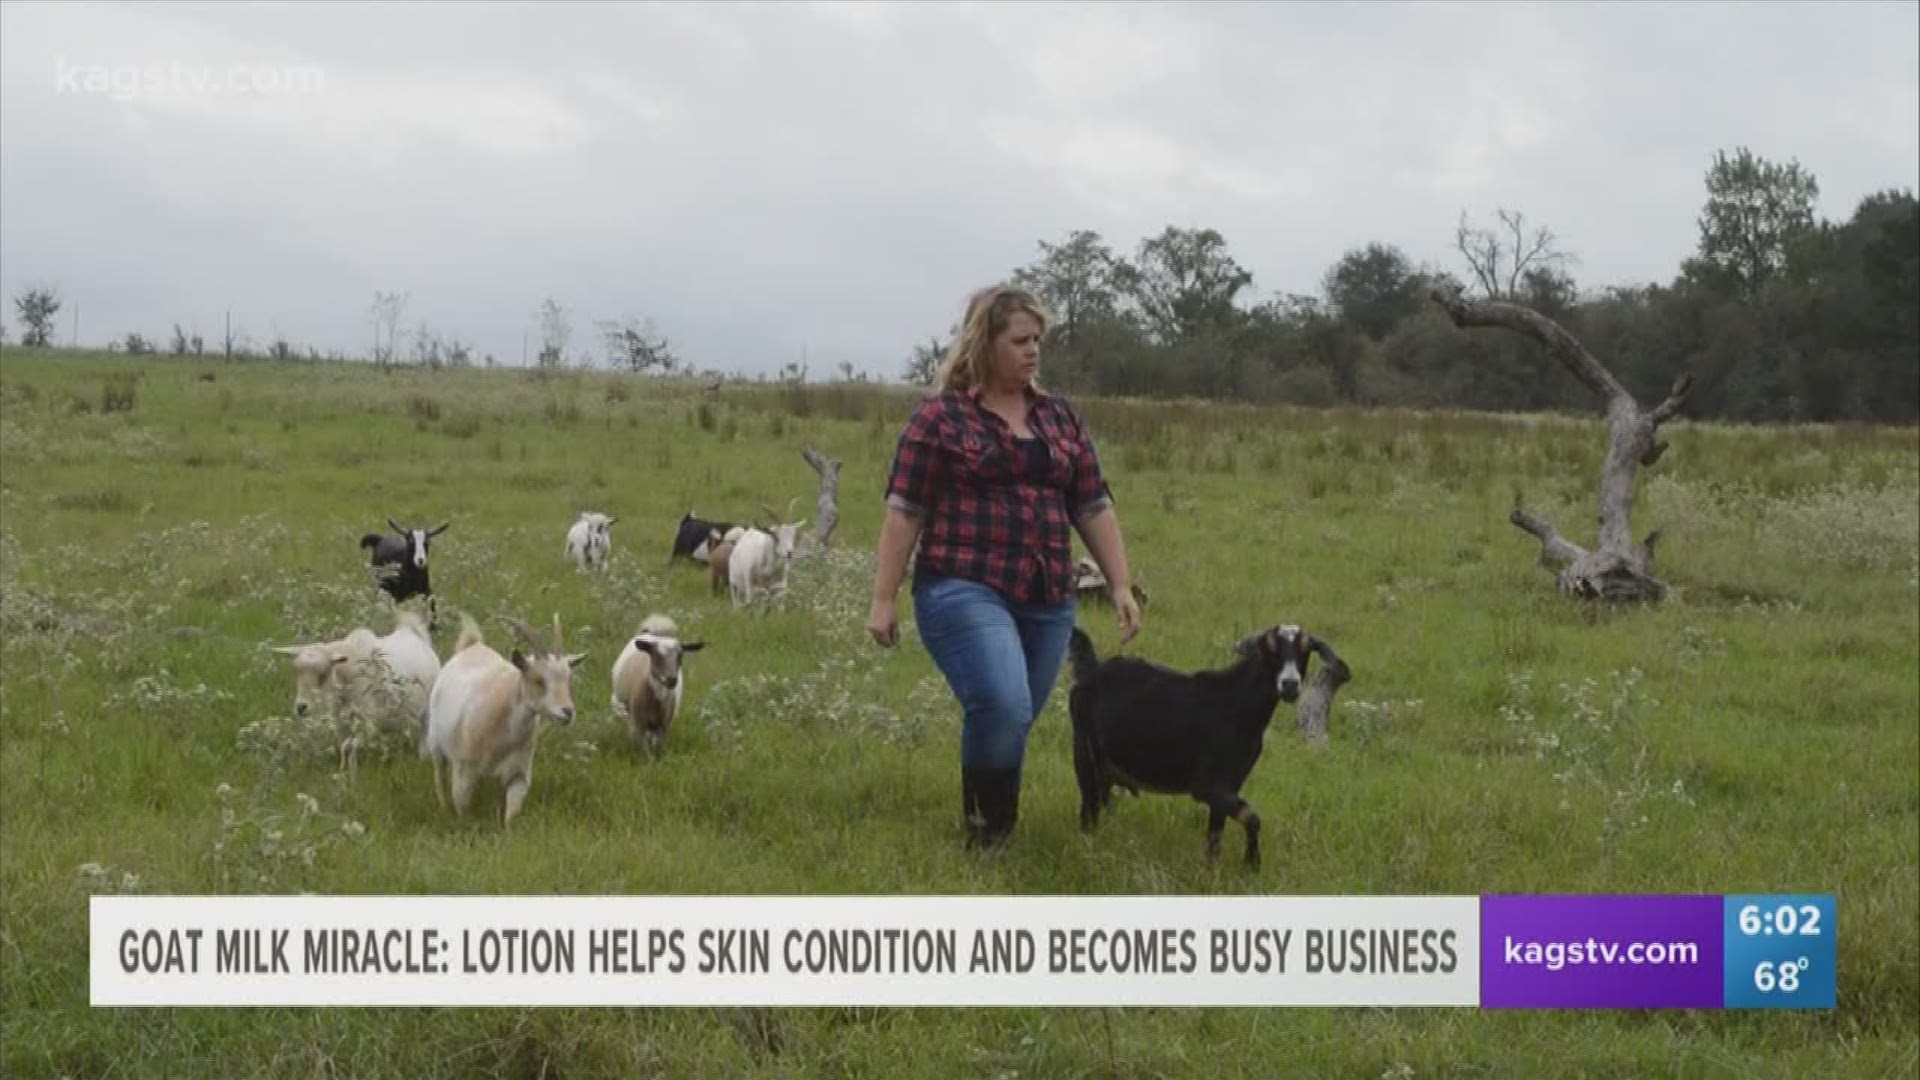 What started as a desperate attempt to cure her daughter's chronic skin condition, grew into a full-blown business for a Grimes County mom.